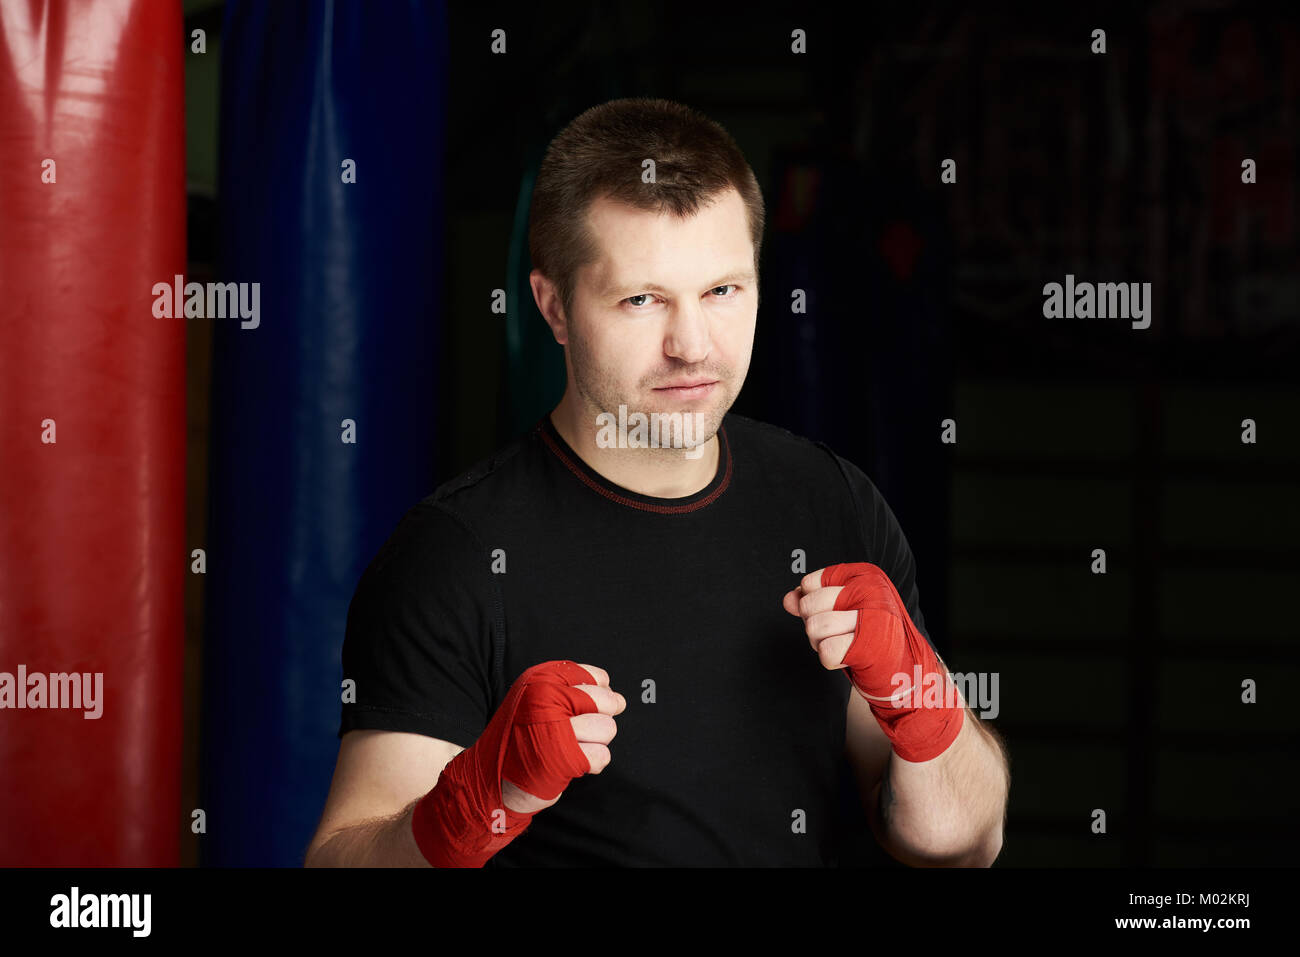 Serious boxing fighter man portrait on dark gym background Stock Photo